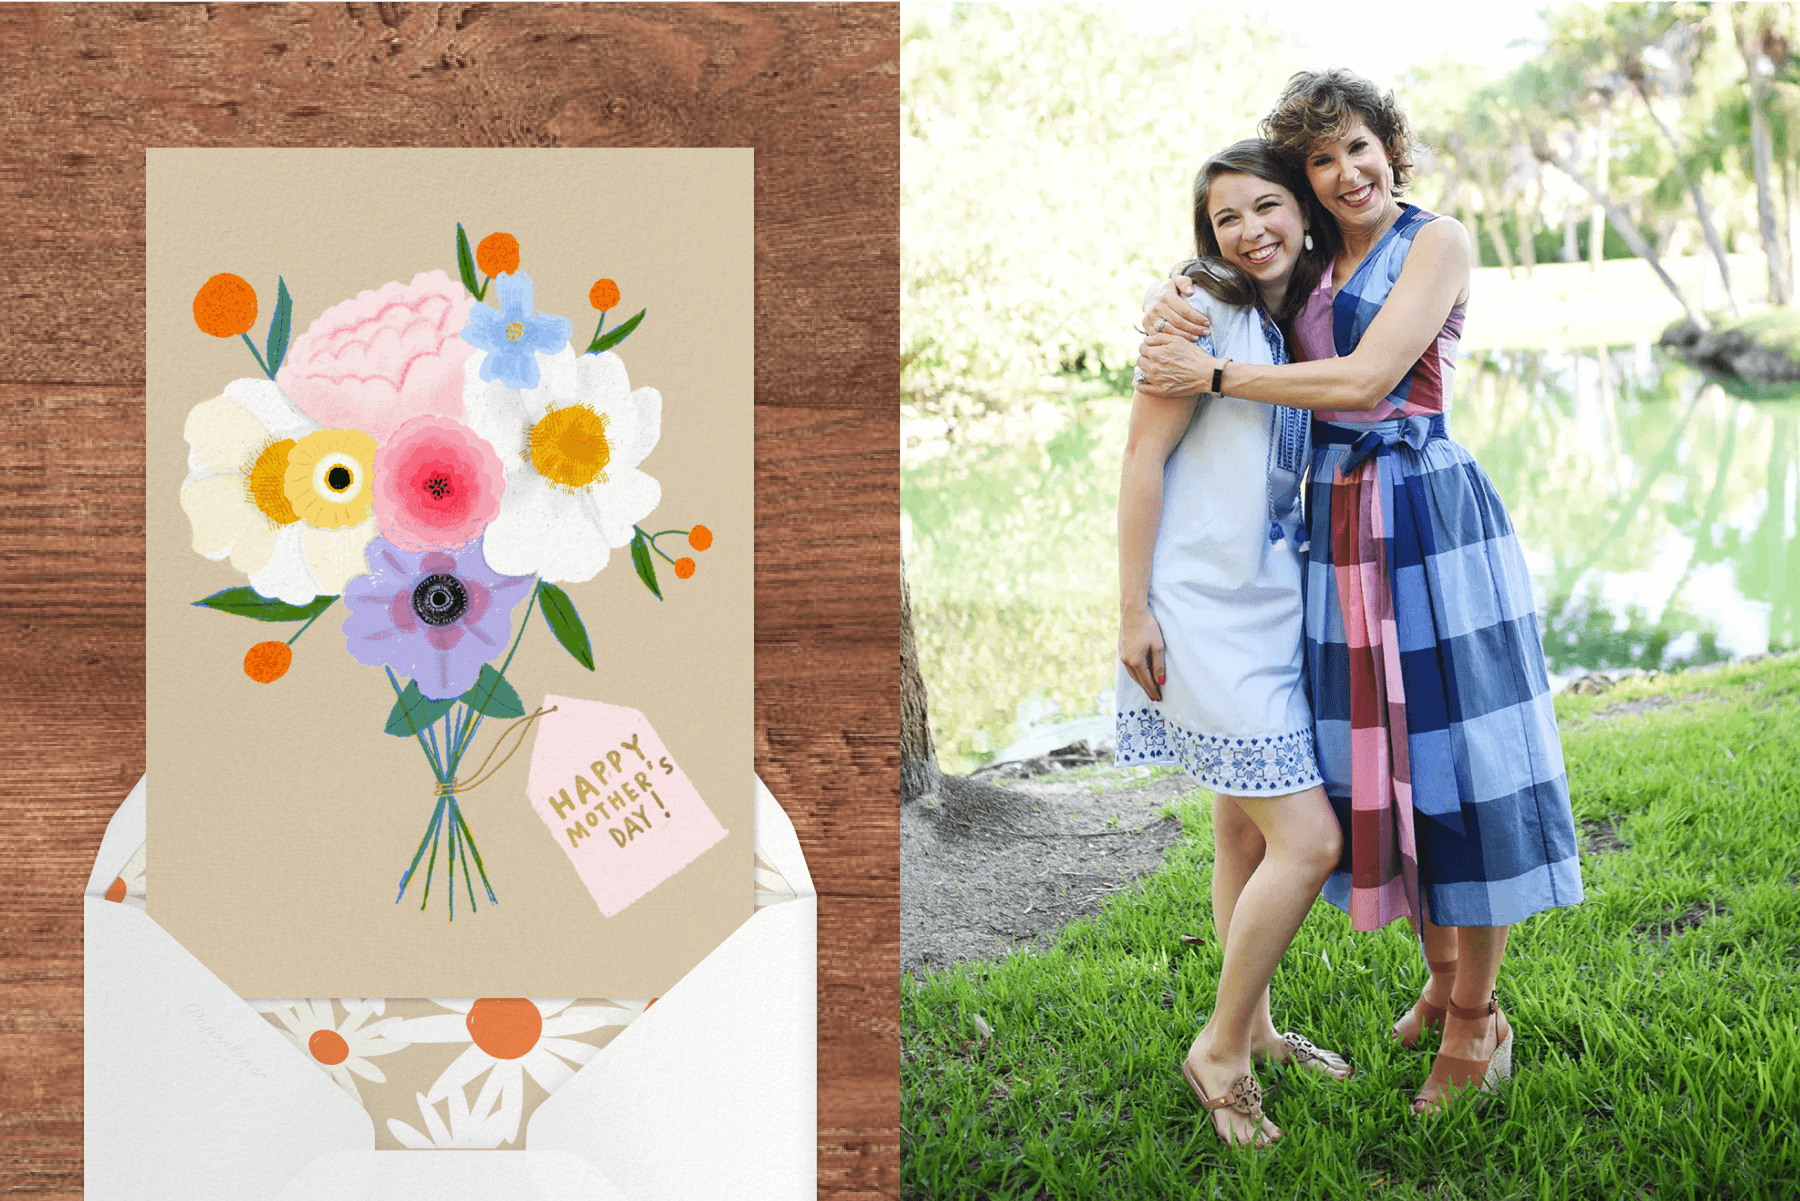 A card with an illustrated bouquet of flowers and a tag that says ‘Happy Mother’s Day!;’ a younger and older woman pose together outdoors.